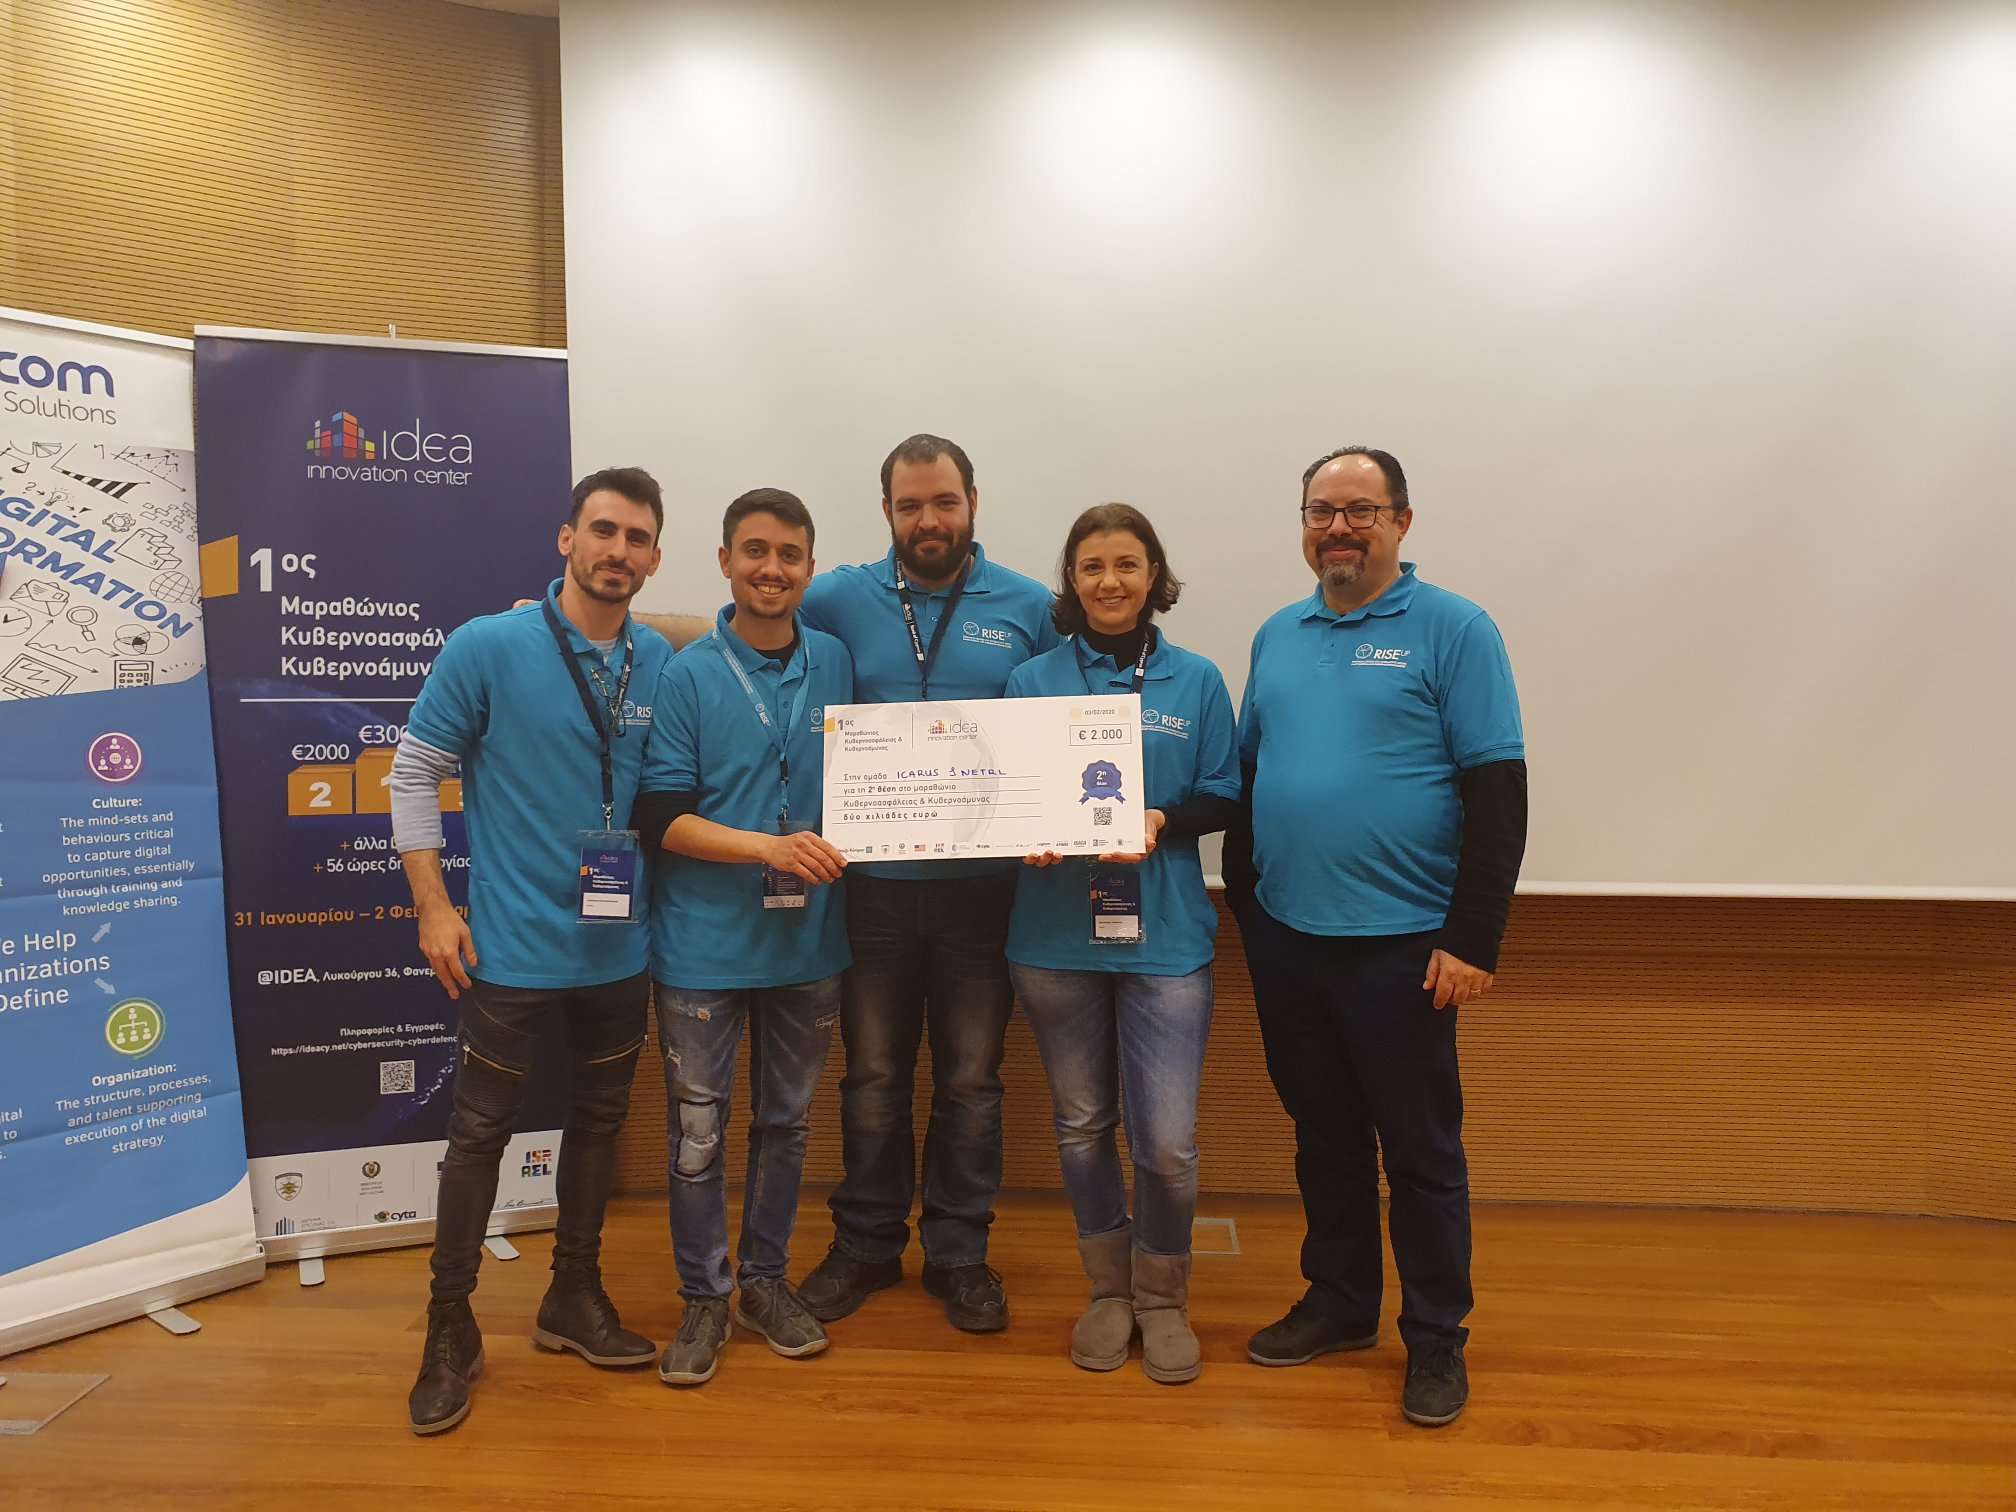 2nd Prize in the 1st Cybersecurity Cyberdefence Hackathon for students and researchers from the Computer Science Department of the University of Cyprus